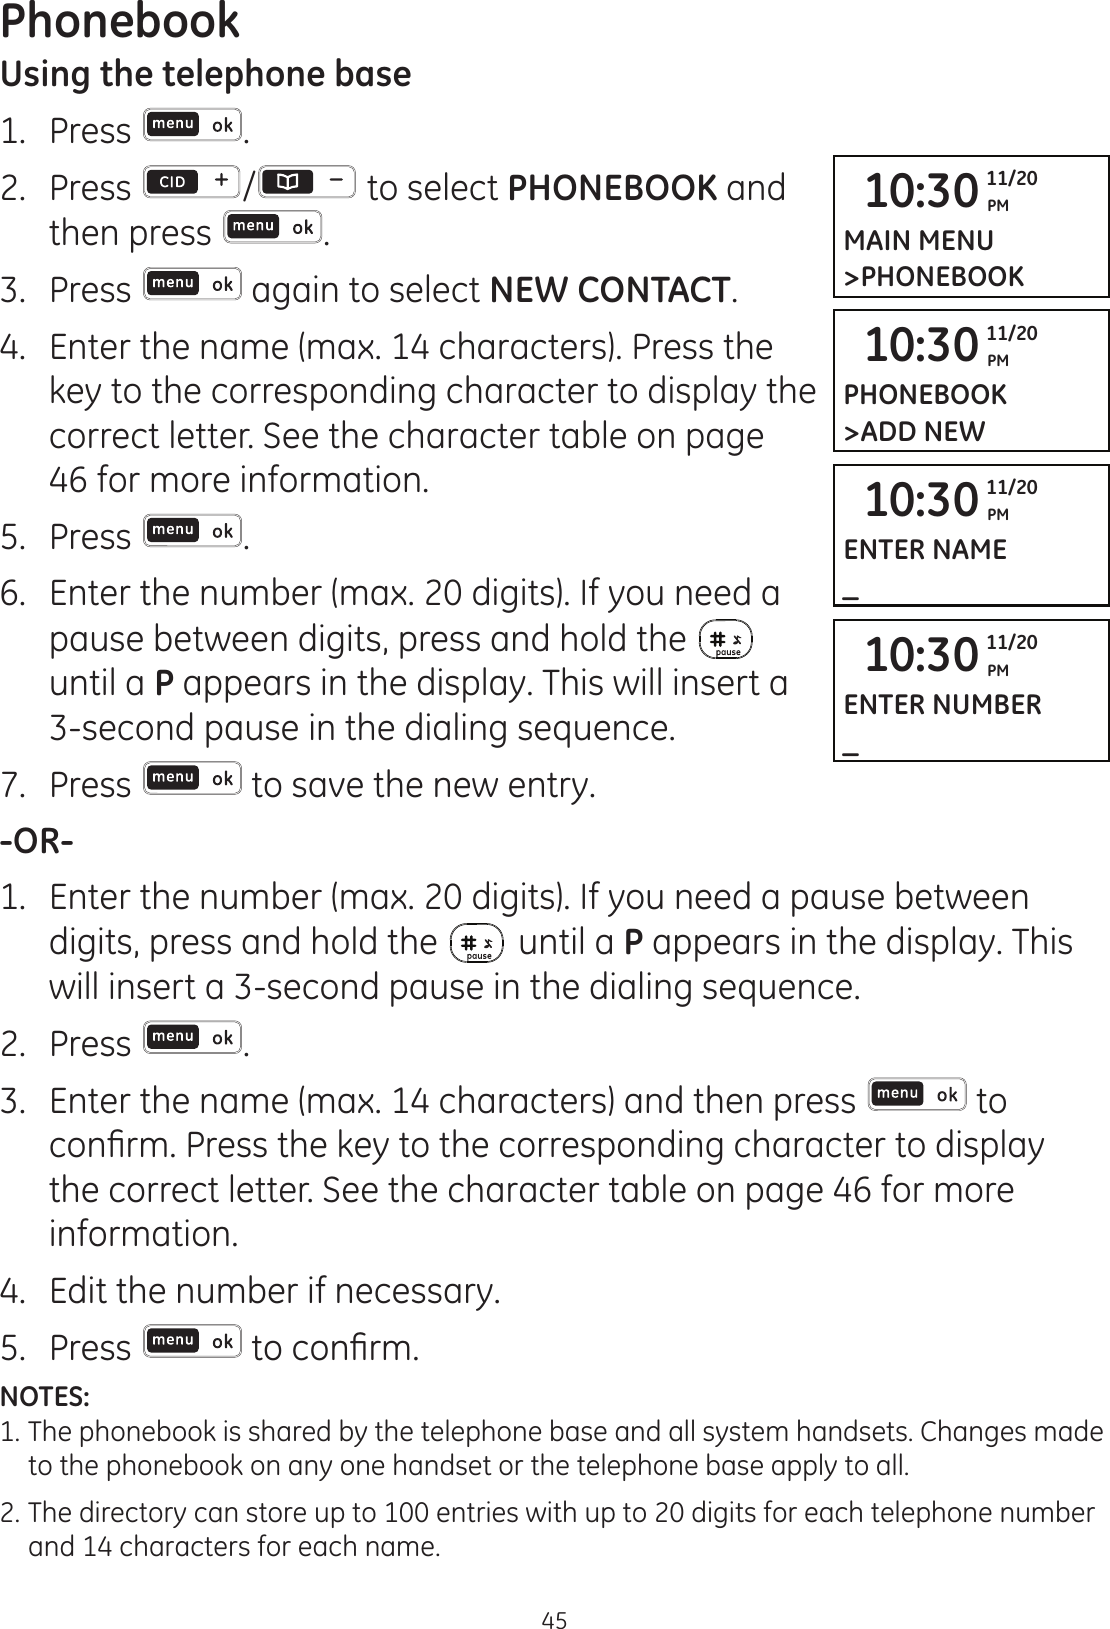 Phonebook45Using the telephone base1.  Press .2.  Press  /  to select PHONEBOOK and then press  .3.  Press   again to select NEW CONTACT.4.  Enter the name (max. 14 characters). Press the key to the corresponding character to display the correct letter. See the character table on page 46 for more information. 5.  Press  .6.  Enter the number (max. 20 digits). If you need a pause between digits, press and hold the   until a P appears in the display. This will insert a 3-second pause in the dialing sequence. 7.  Press   to save the new entry. -OR-1.  Enter the number (max. 20 digits). If you need a pause between digits, press and hold the   until a P appears in the display. This will insert a 3-second pause in the dialing sequence.2.  Press  .3.  Enter the name (max. 14 characters) and then press   to FRQ¿UP3UHVVWKHNH\WRWKHFRUUHVSRQGLQJFKDUDFWHUWRGLVSOD\the correct letter. See the character table on page 46 for more information.4.  Edit the number if necessary. 5.  Press  WRFRQ¿UPNOTES: 1. The phonebook is shared by the telephone base and all system handsets. Changes made    to the phonebook on any one handset or the telephone base apply to all. 2.  The directory can store up to 100 entries with up to 20 digits for each telephone number    and 14 characters for each name.10:30 PM11/20MAIN MENU&gt;PHONEBOOK10:30 PM11/20PHONEBOOK&gt;ADD NEW10:30 PM11/20ENTER NAME_10:30 PM11/20ENTER NUMBER_